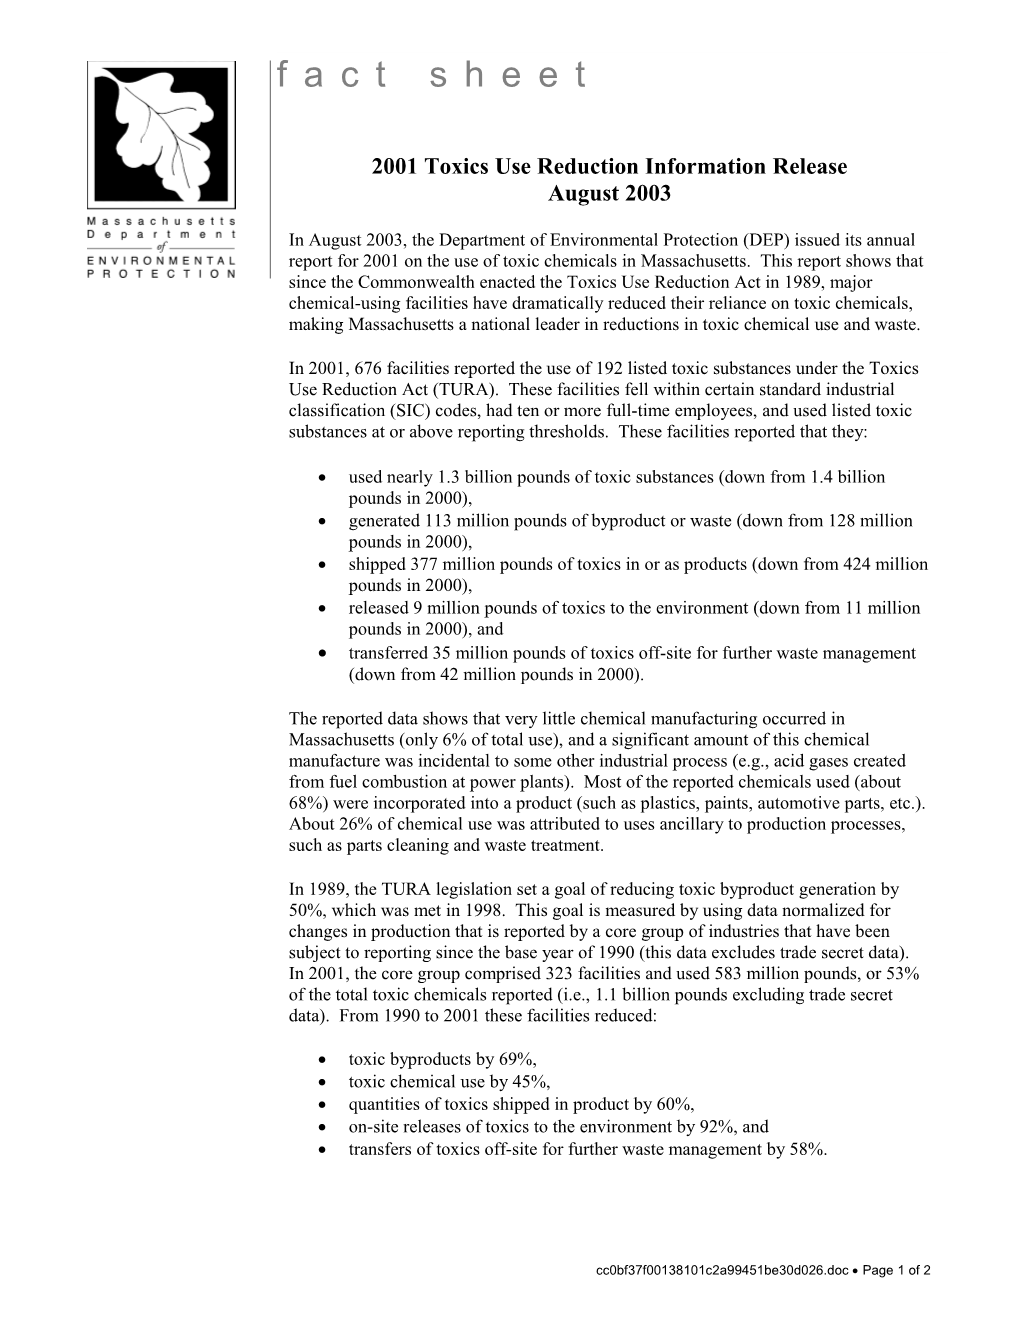 2000 Toxics Use Reduction Information Release